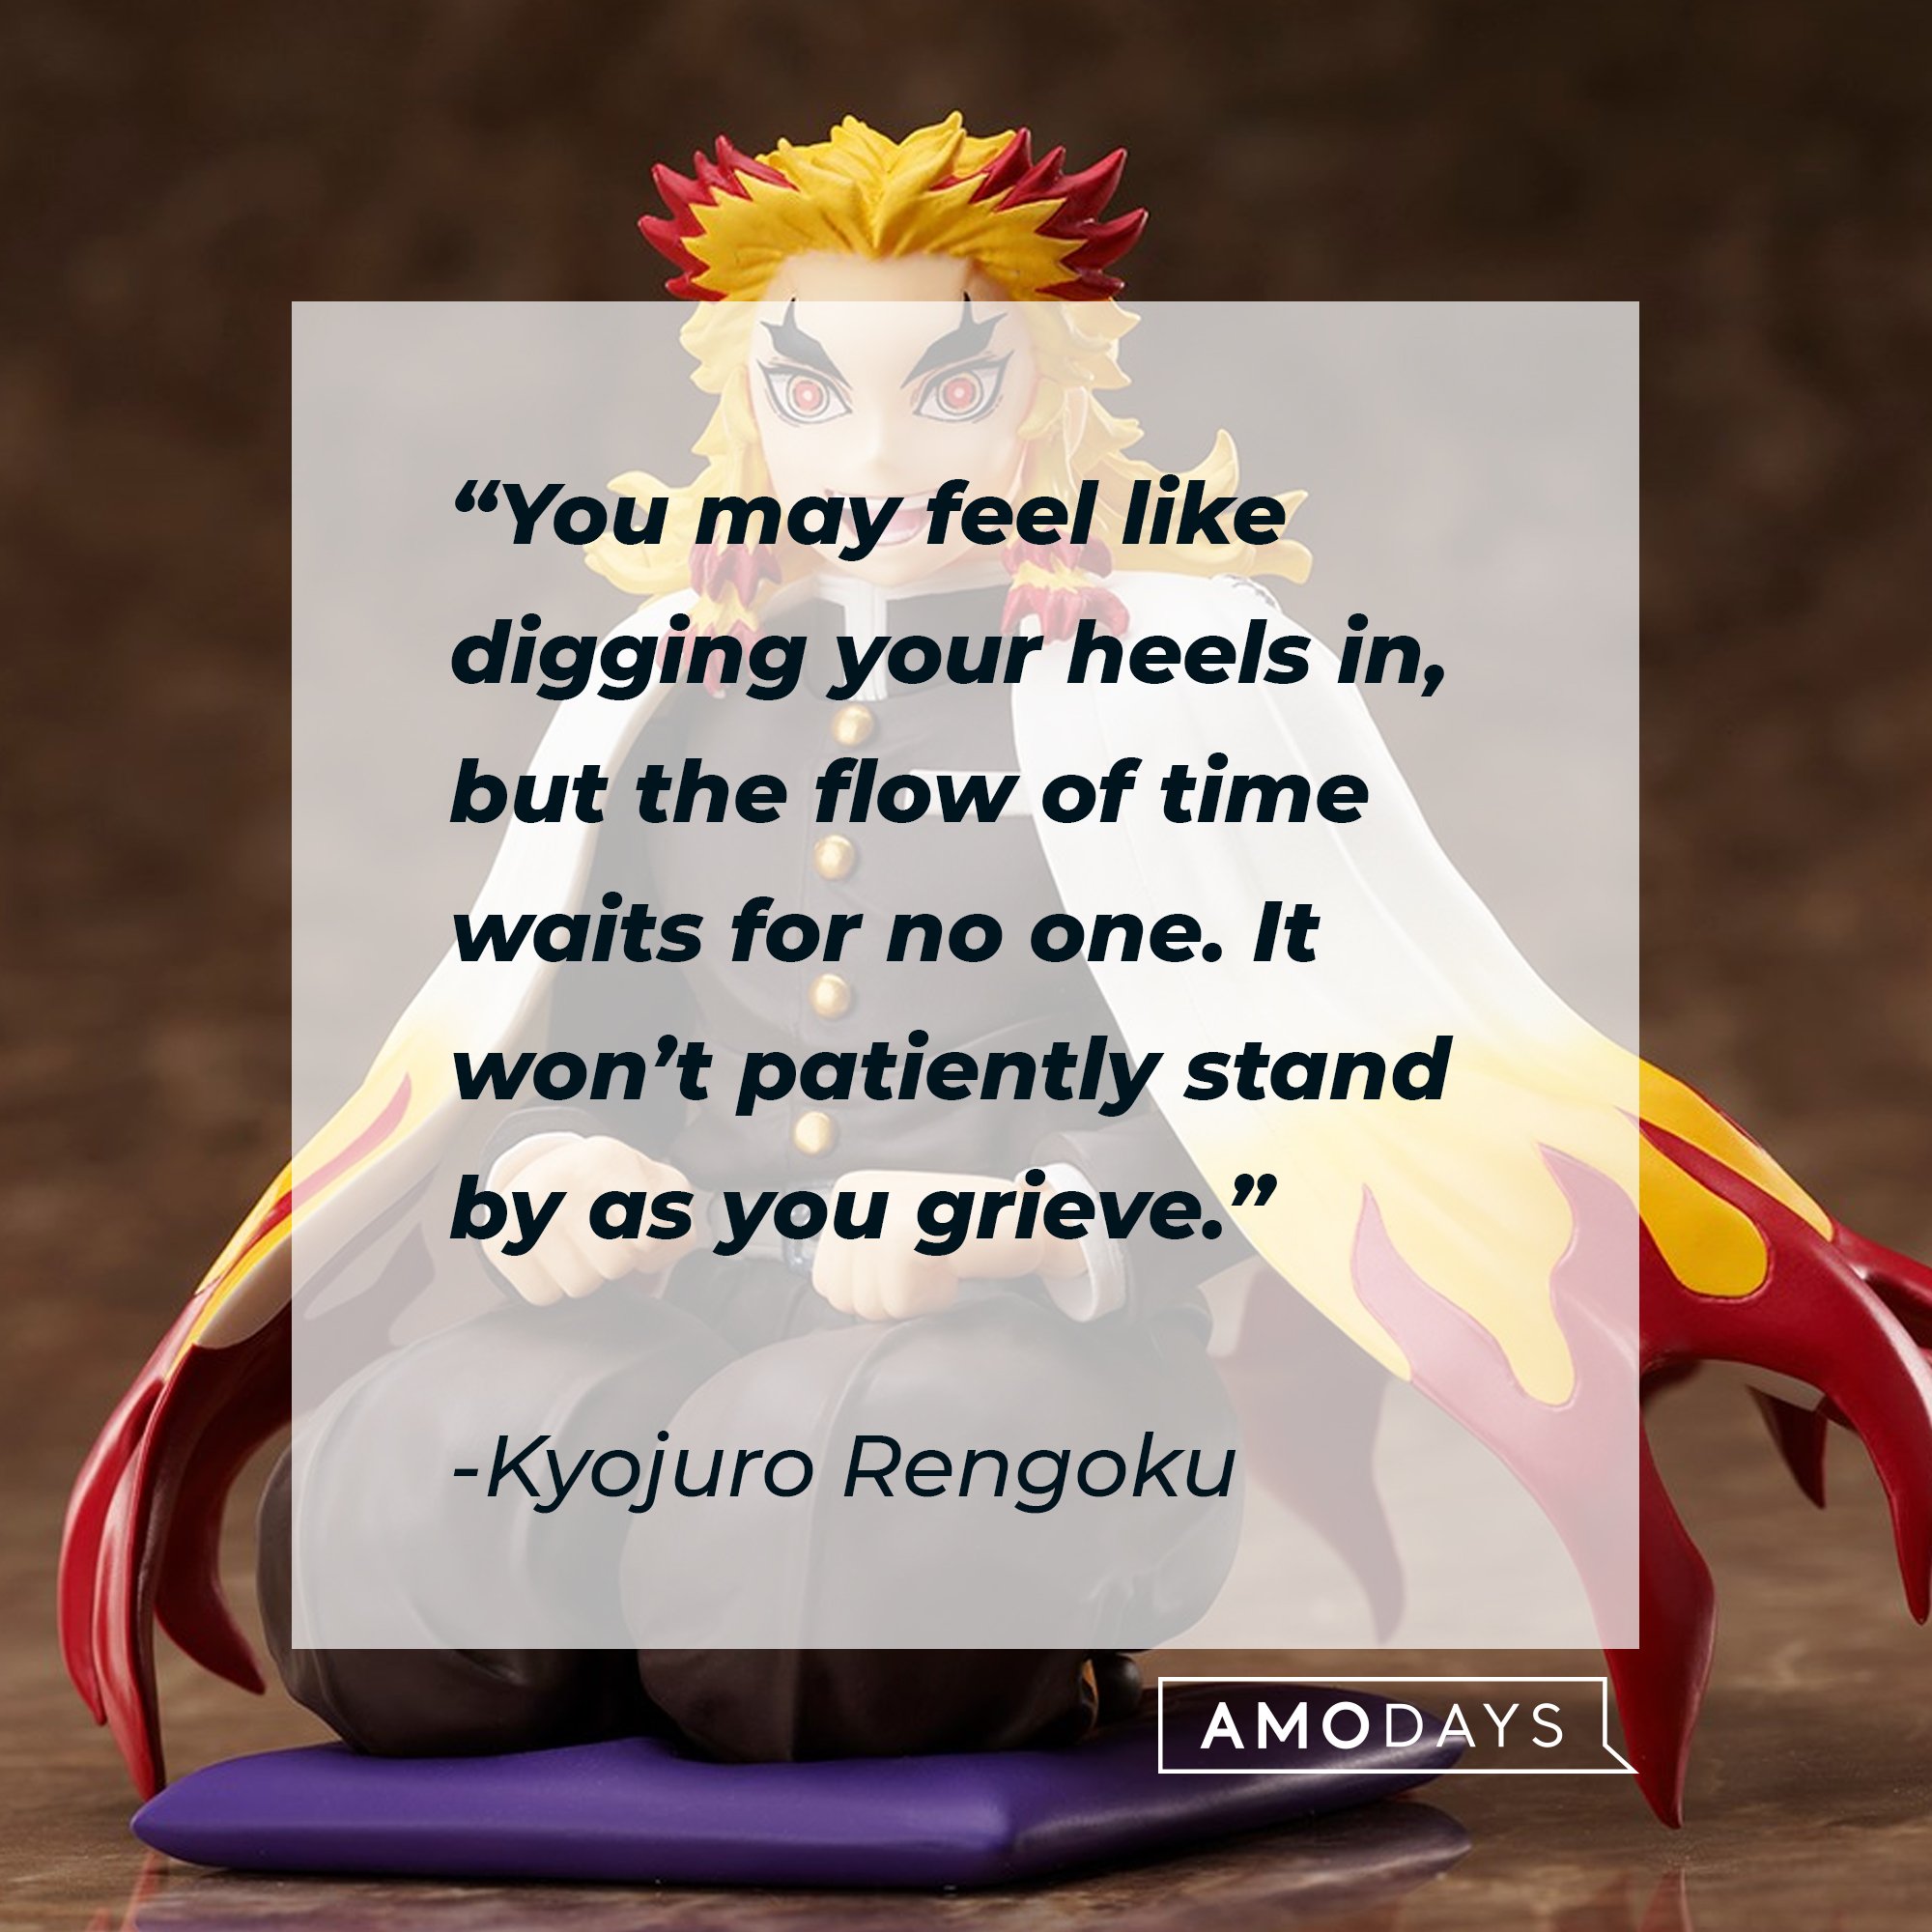 Kyojuro Rengoku’s quote: "You may feel like digging your heels in. But the flow of time waits for no one; it won’t patiently stand by as you grieve." | Image: AmoDays